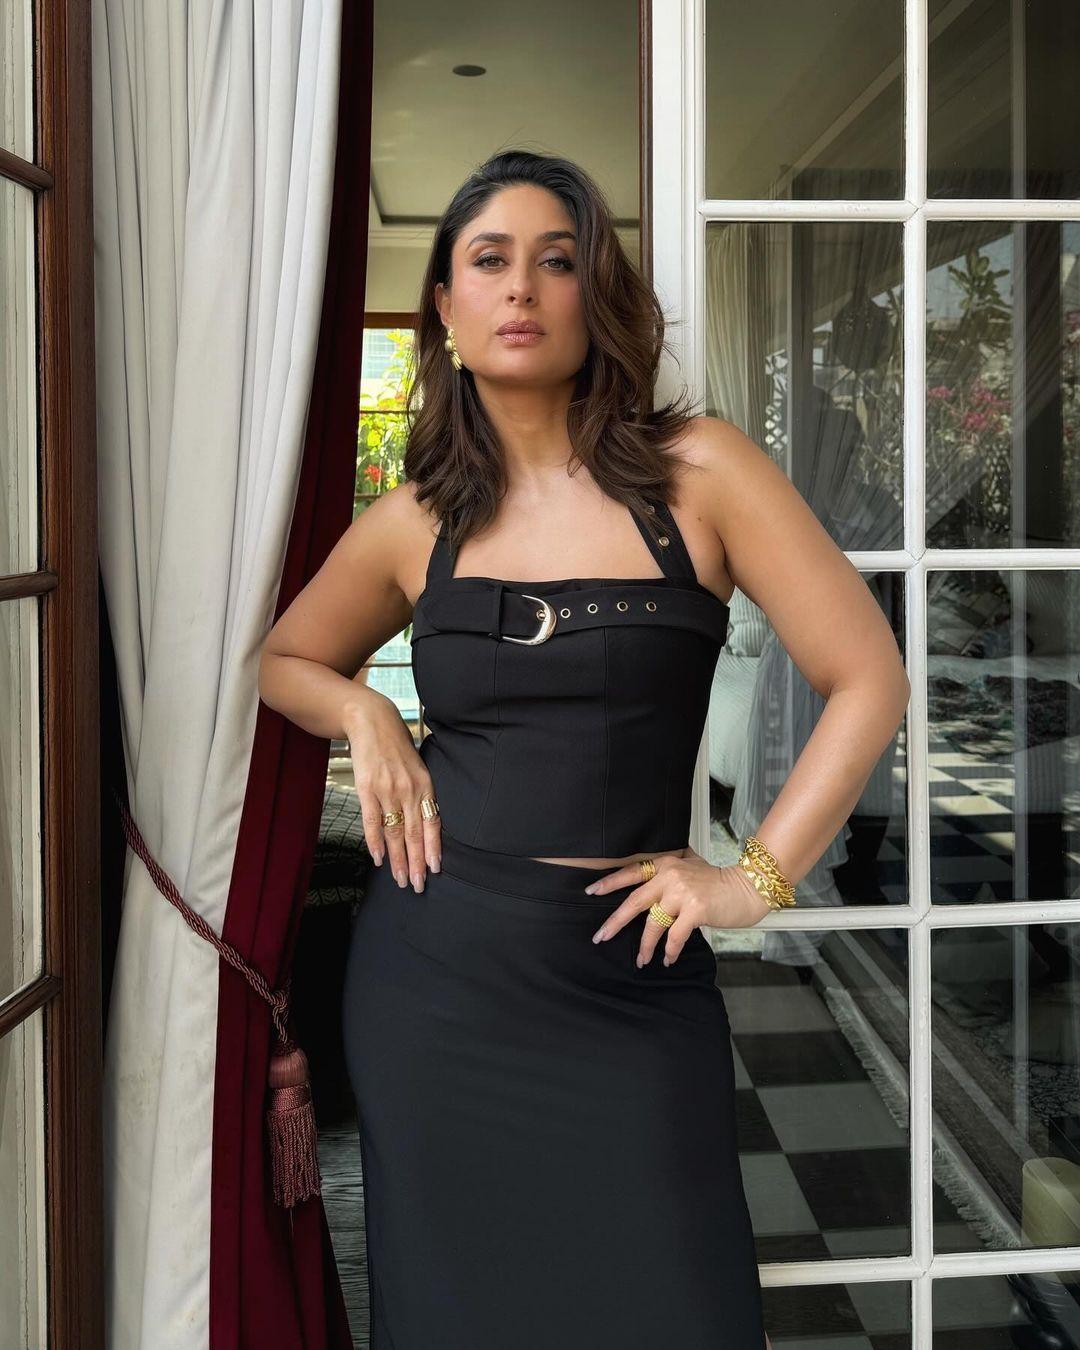 The actress's top features a belt design which gives Bebo a bossy look